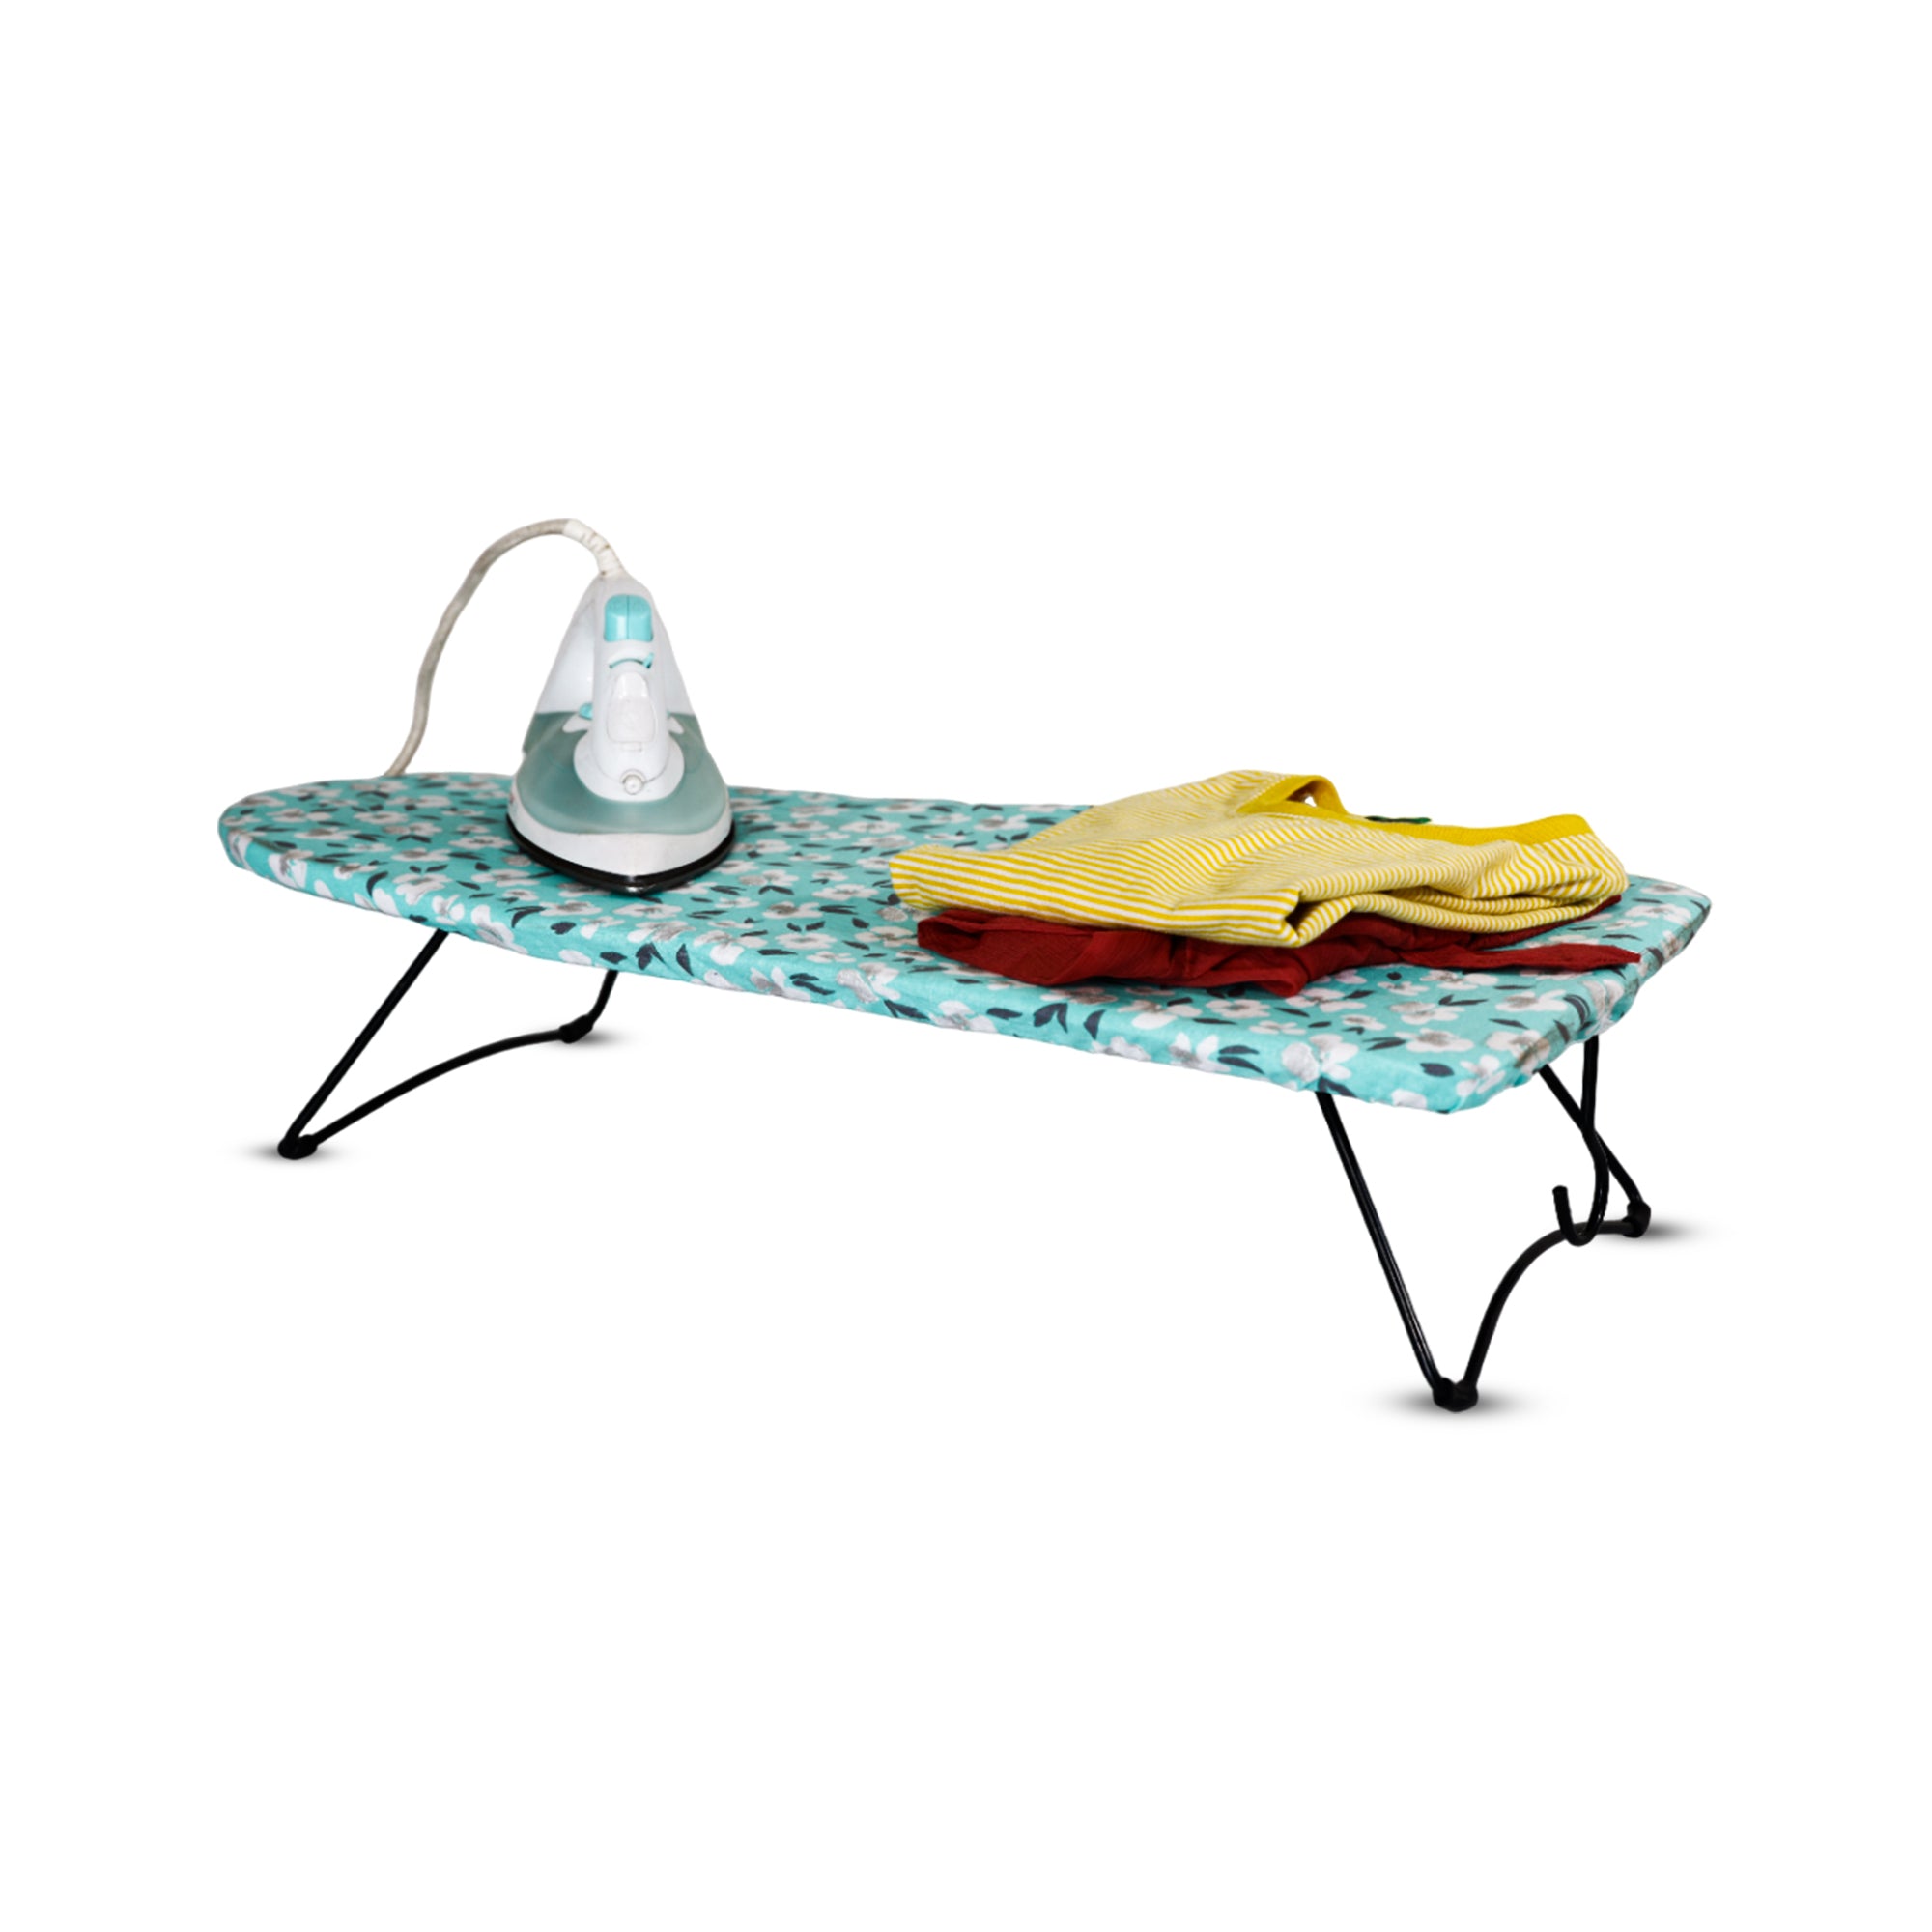 Budapest Tabletop Ironing Board | Foldable Tabletop Ironing Board Without Iron Rest, Green